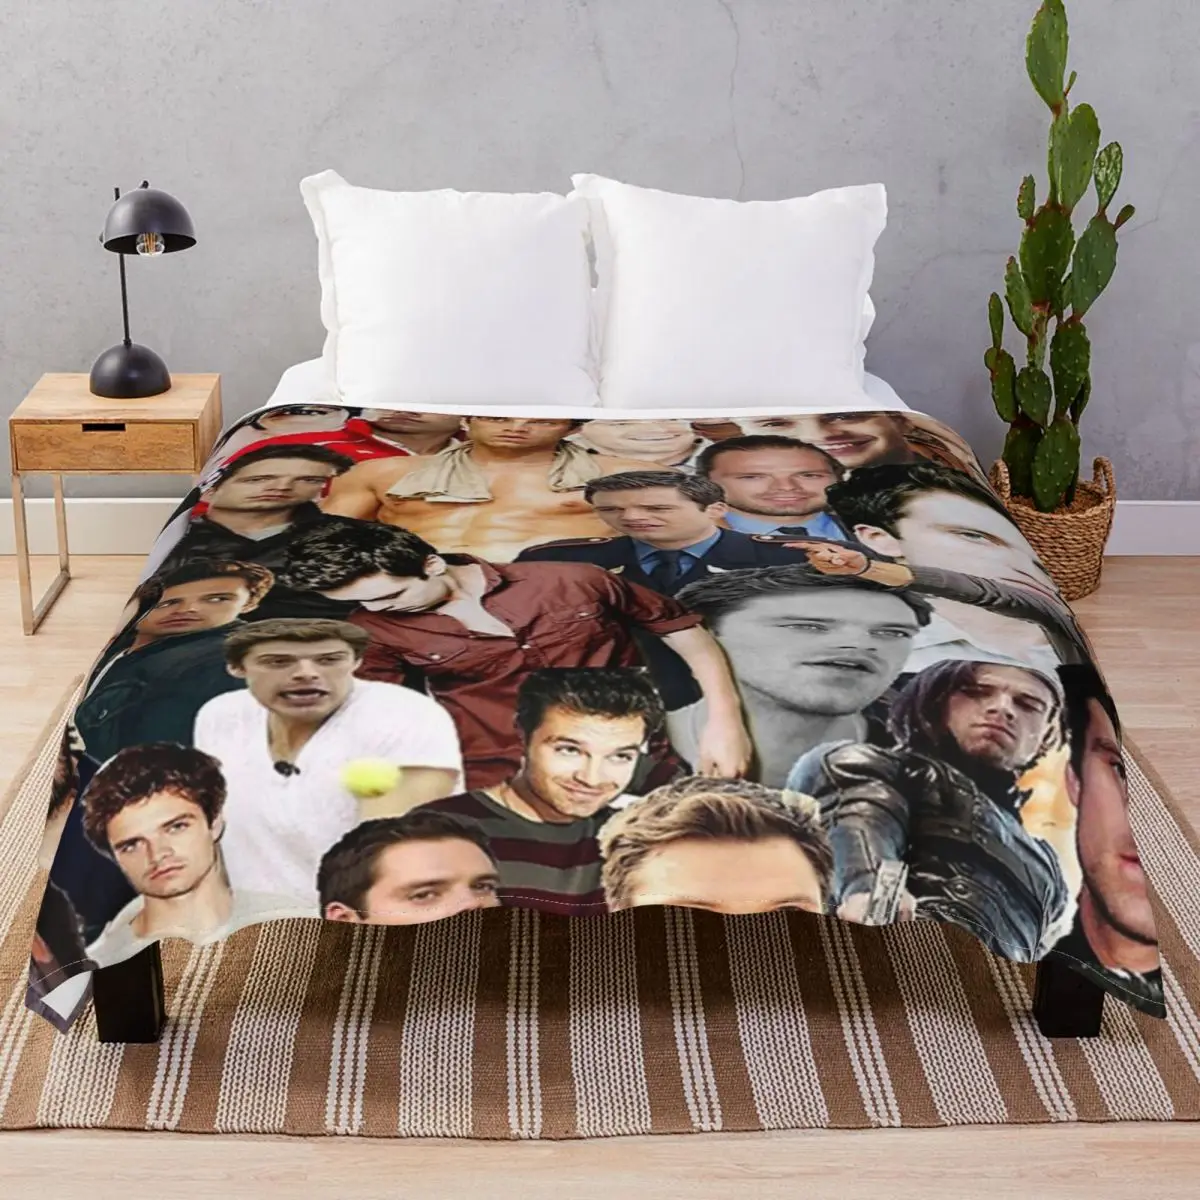 Sebastian Stan Photo Collage Blanket Flannel Printed Multifunction Throw Blankets for Bedding Home Couch Travel Cinema